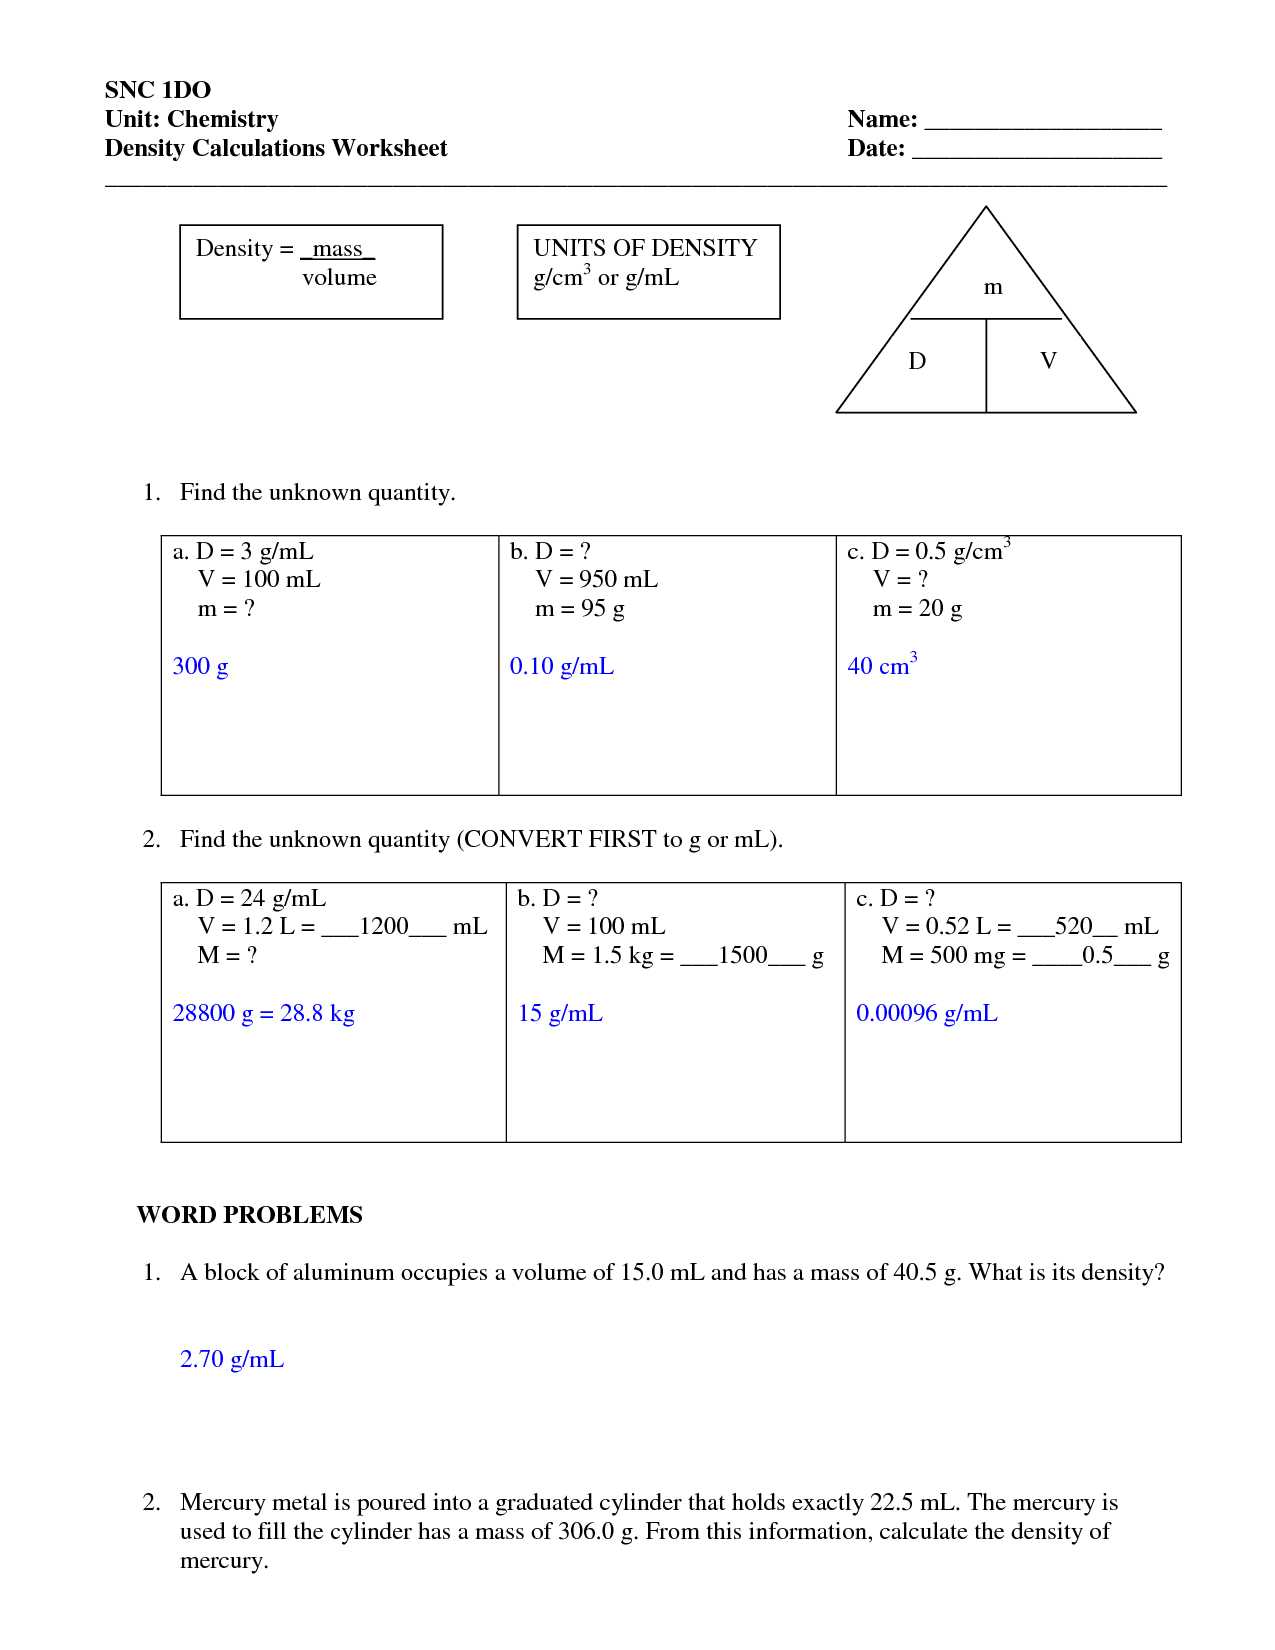 Balancing Equations Worksheet 1 Answer Key as Well as Density Worksheets with Answers